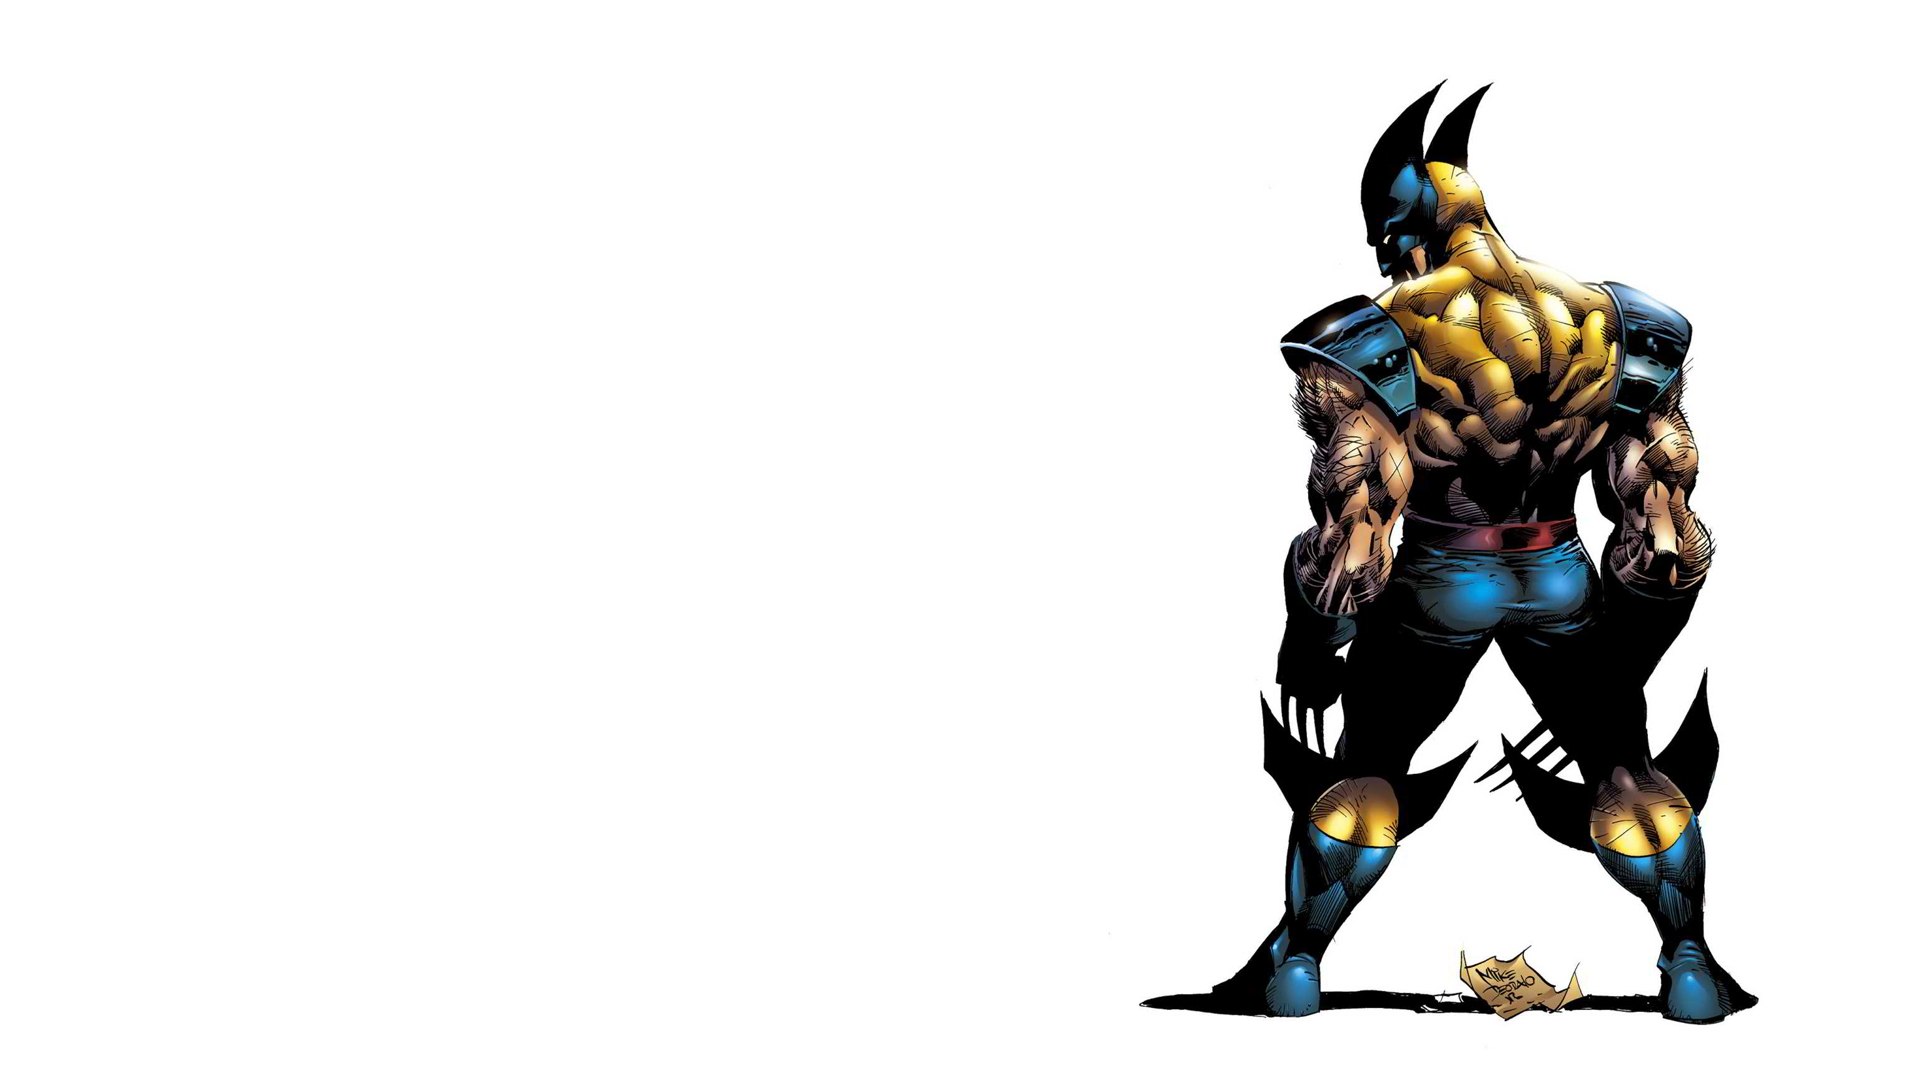 Wolverine wallpaper 1920x1080 - (#32354) - High Quality and ...